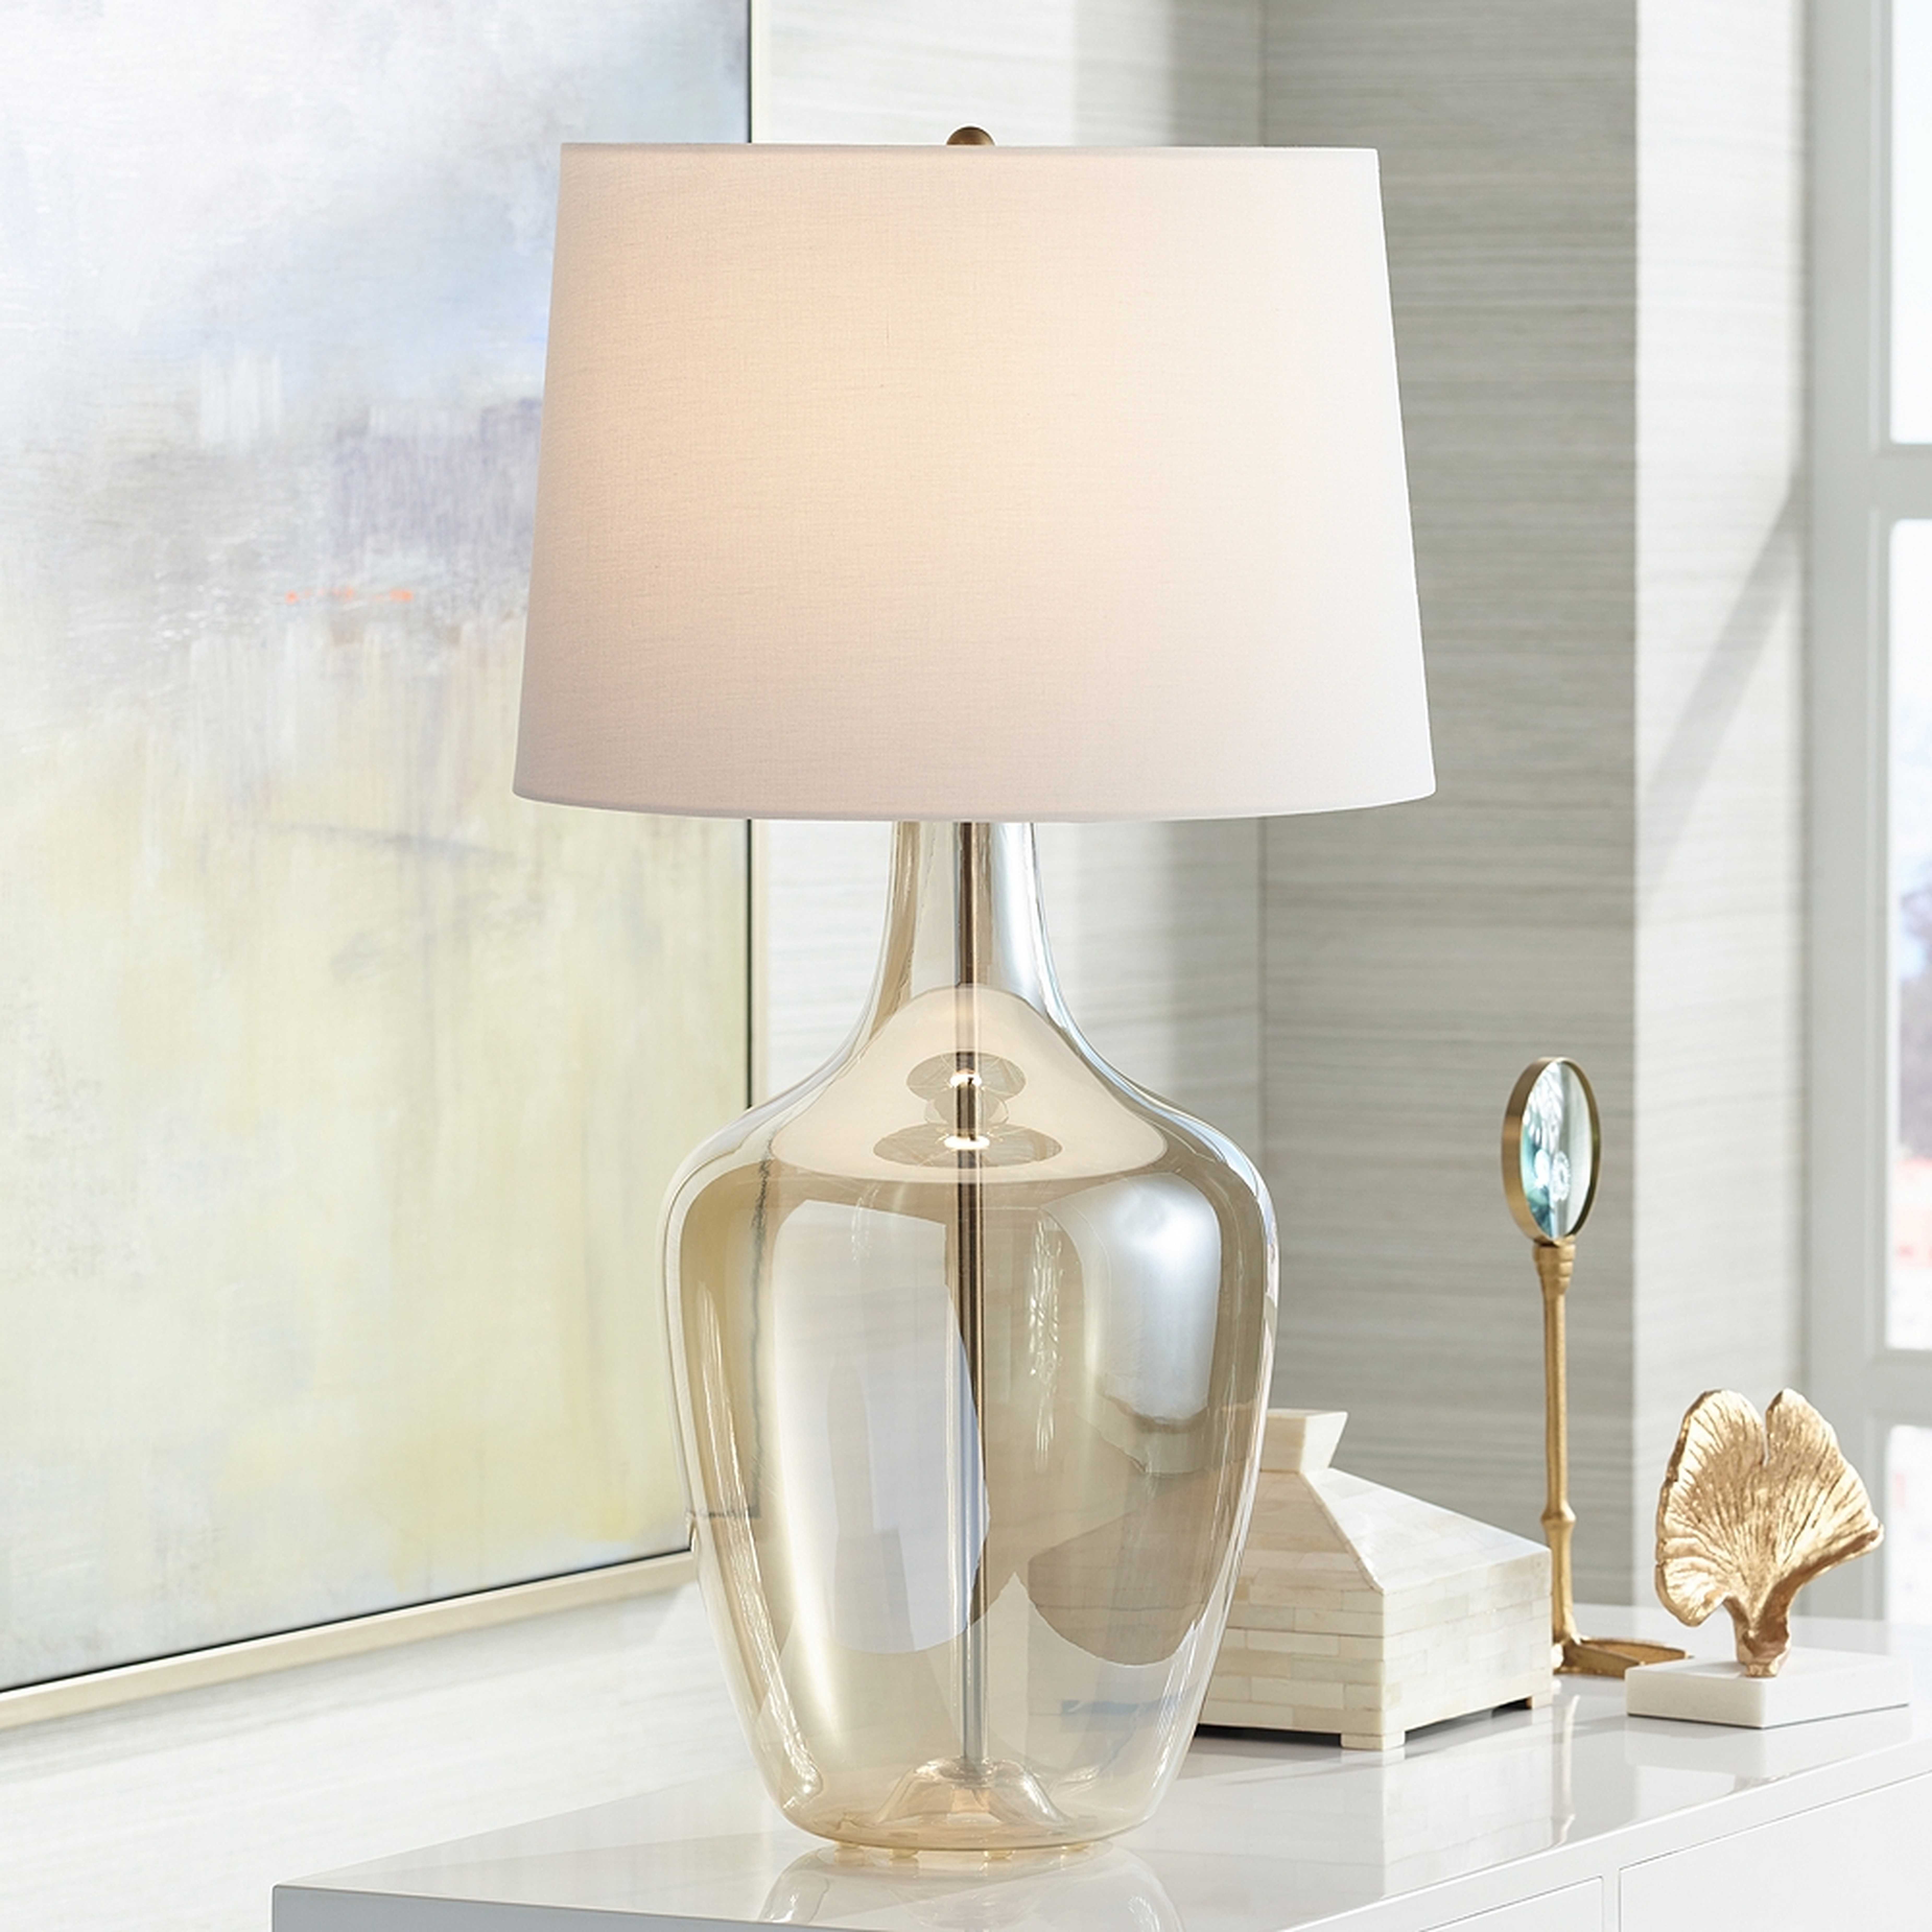 Ania Champagne Glass Jar Table Lamp with Table Top Dimmer - Style # 89K80 - Lamps Plus